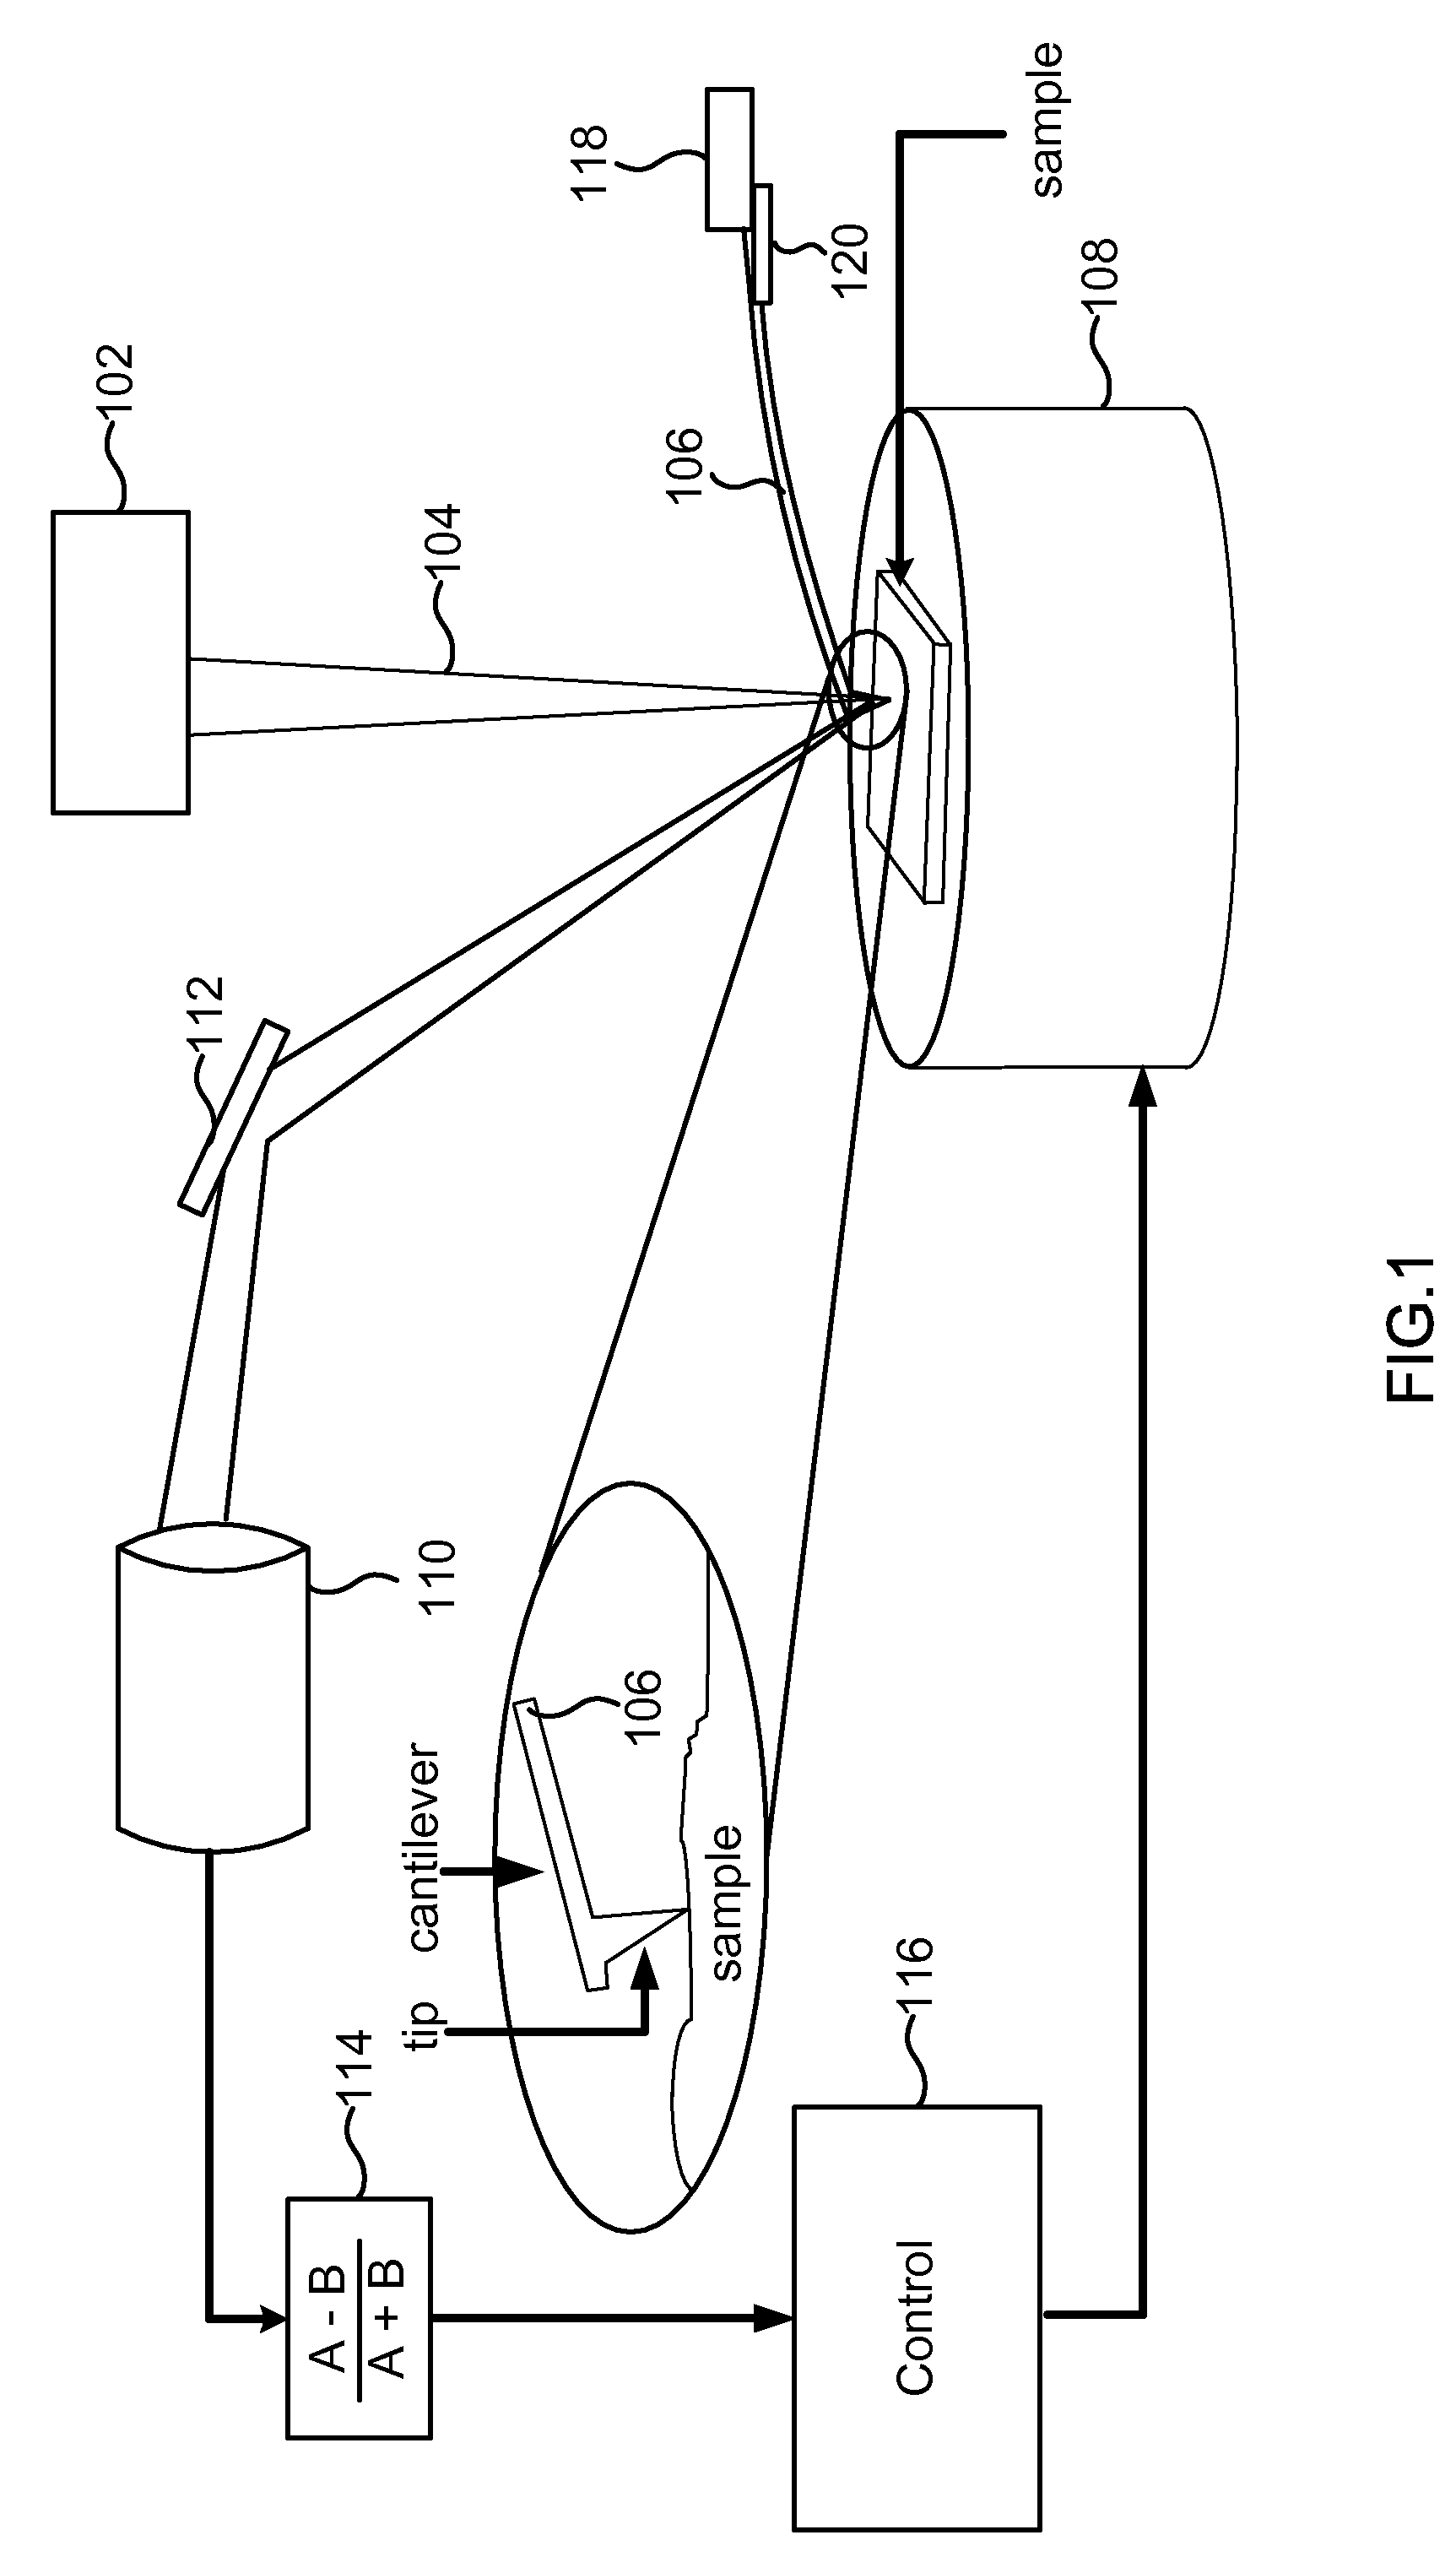 Method to transiently detect sample features using cantilevers